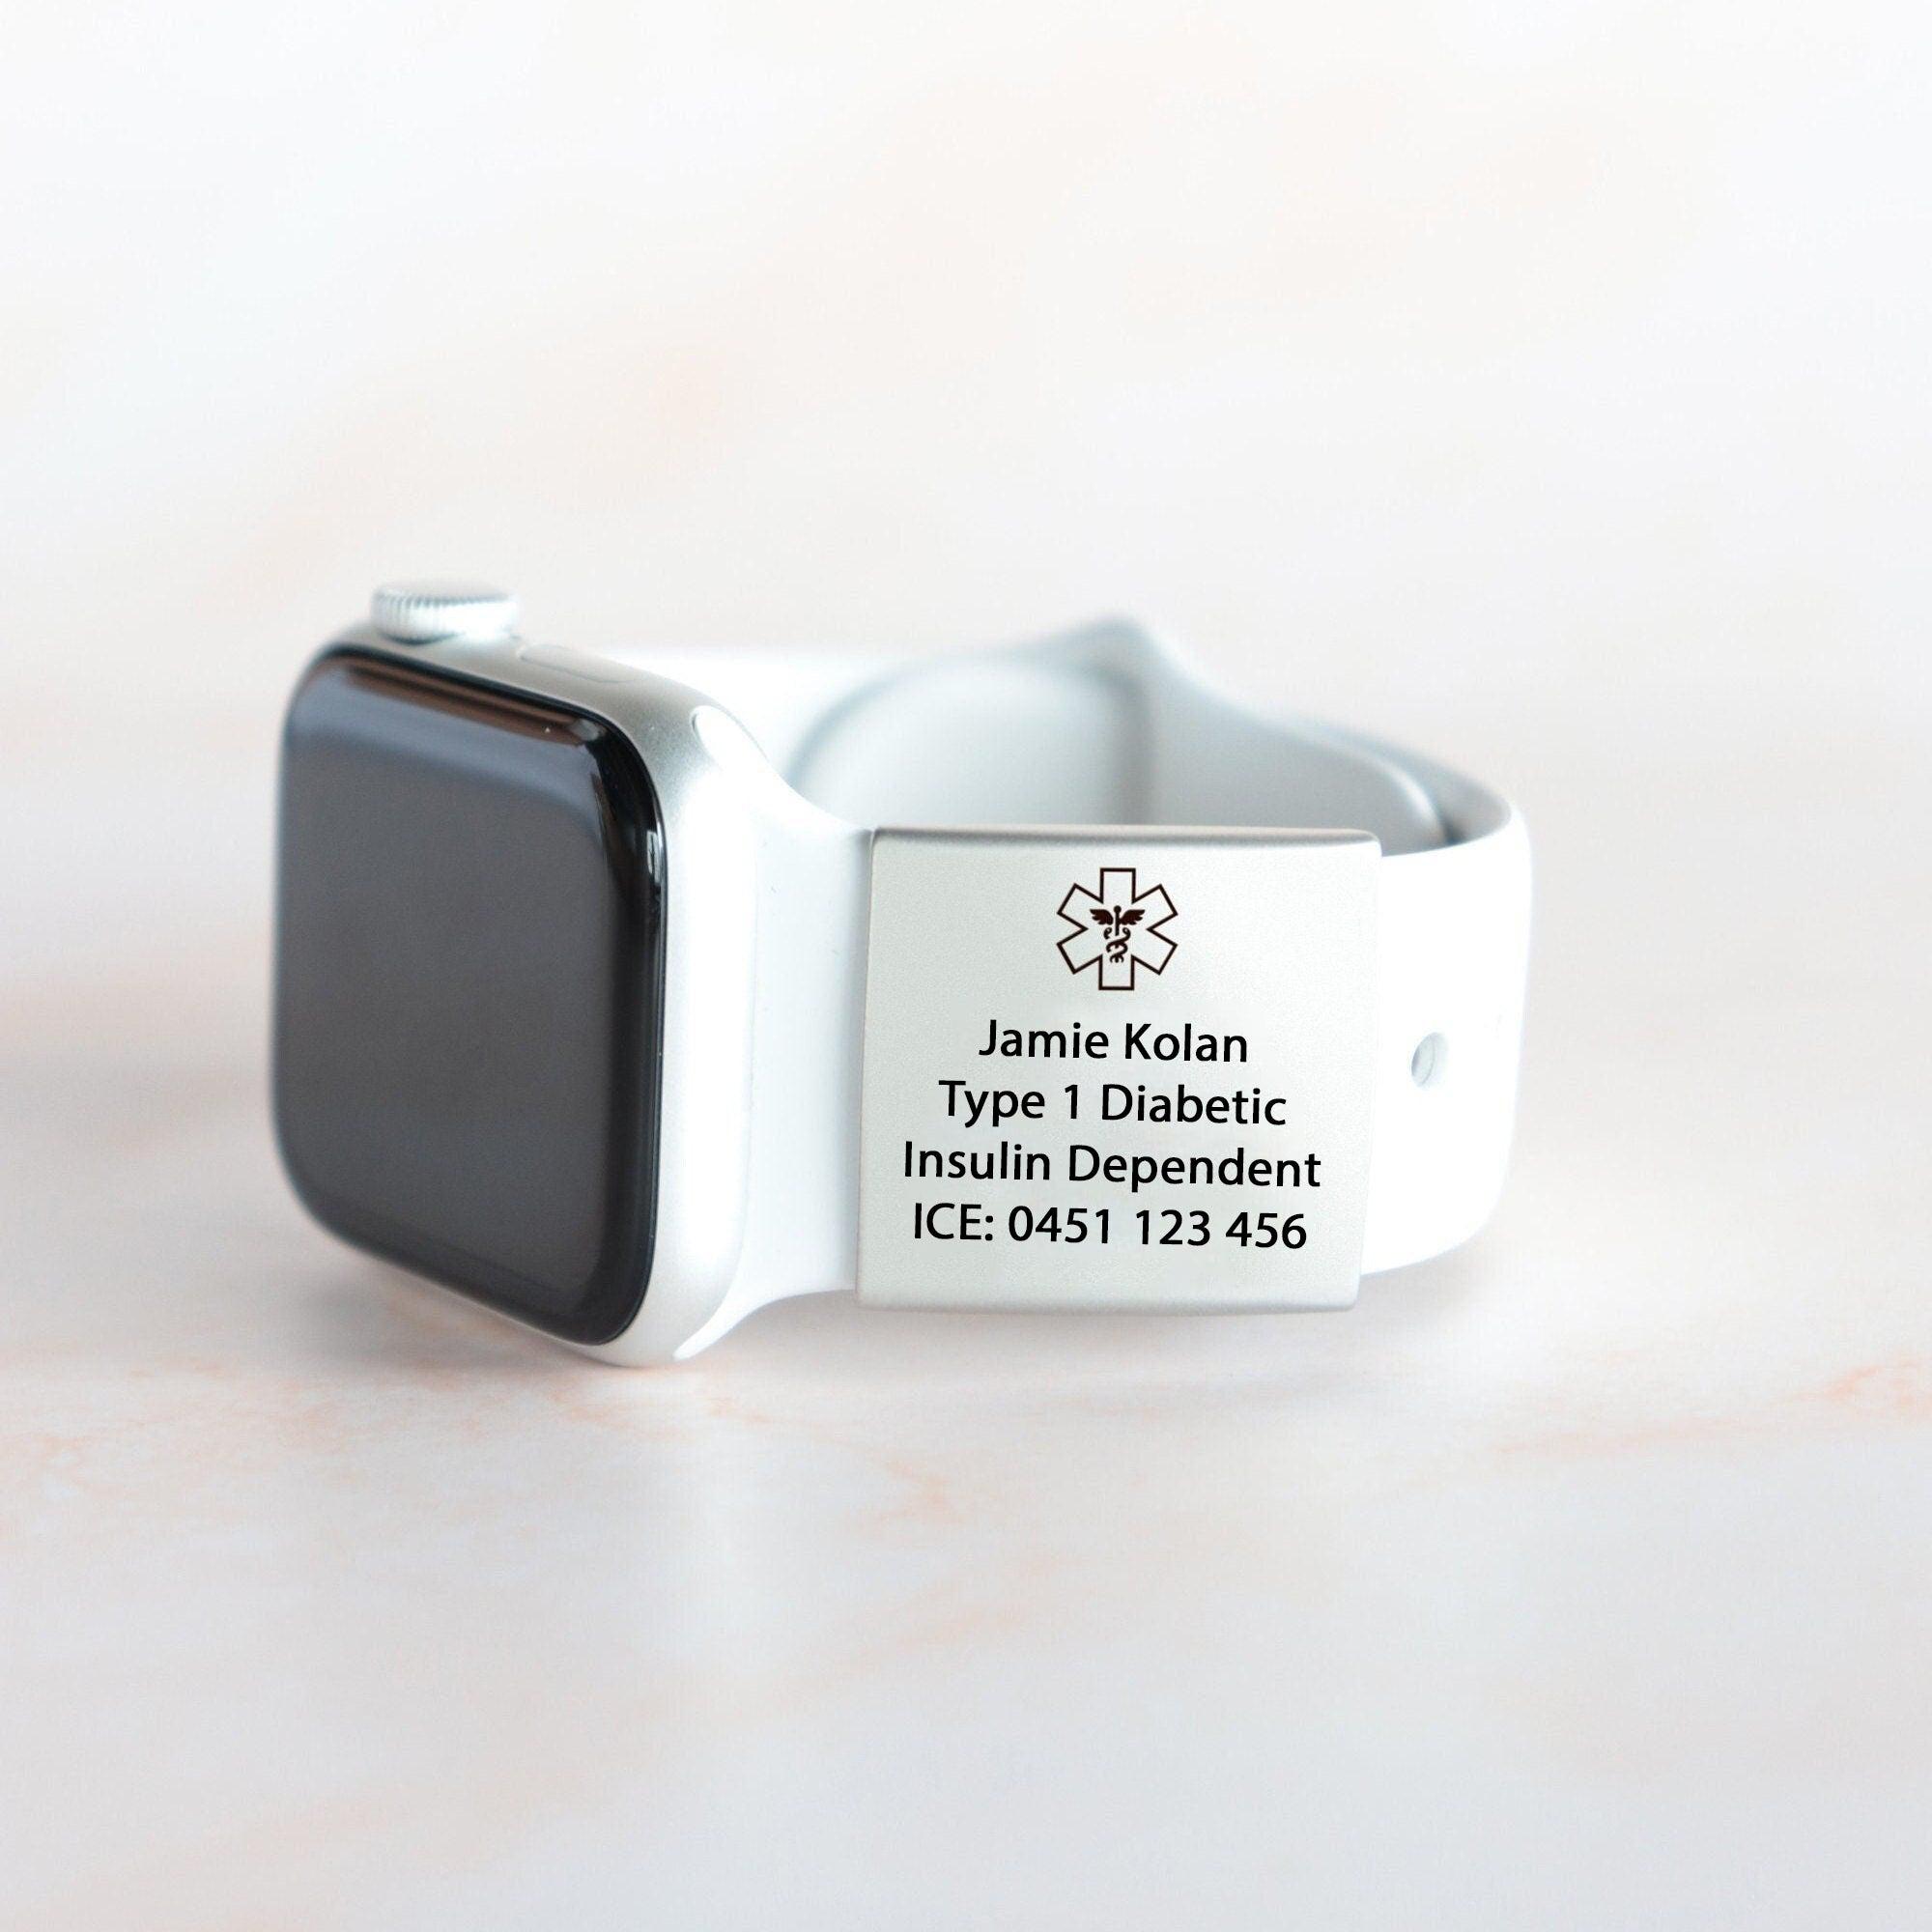 Personalised ID Tag for Watch Band & Fitness Trackers